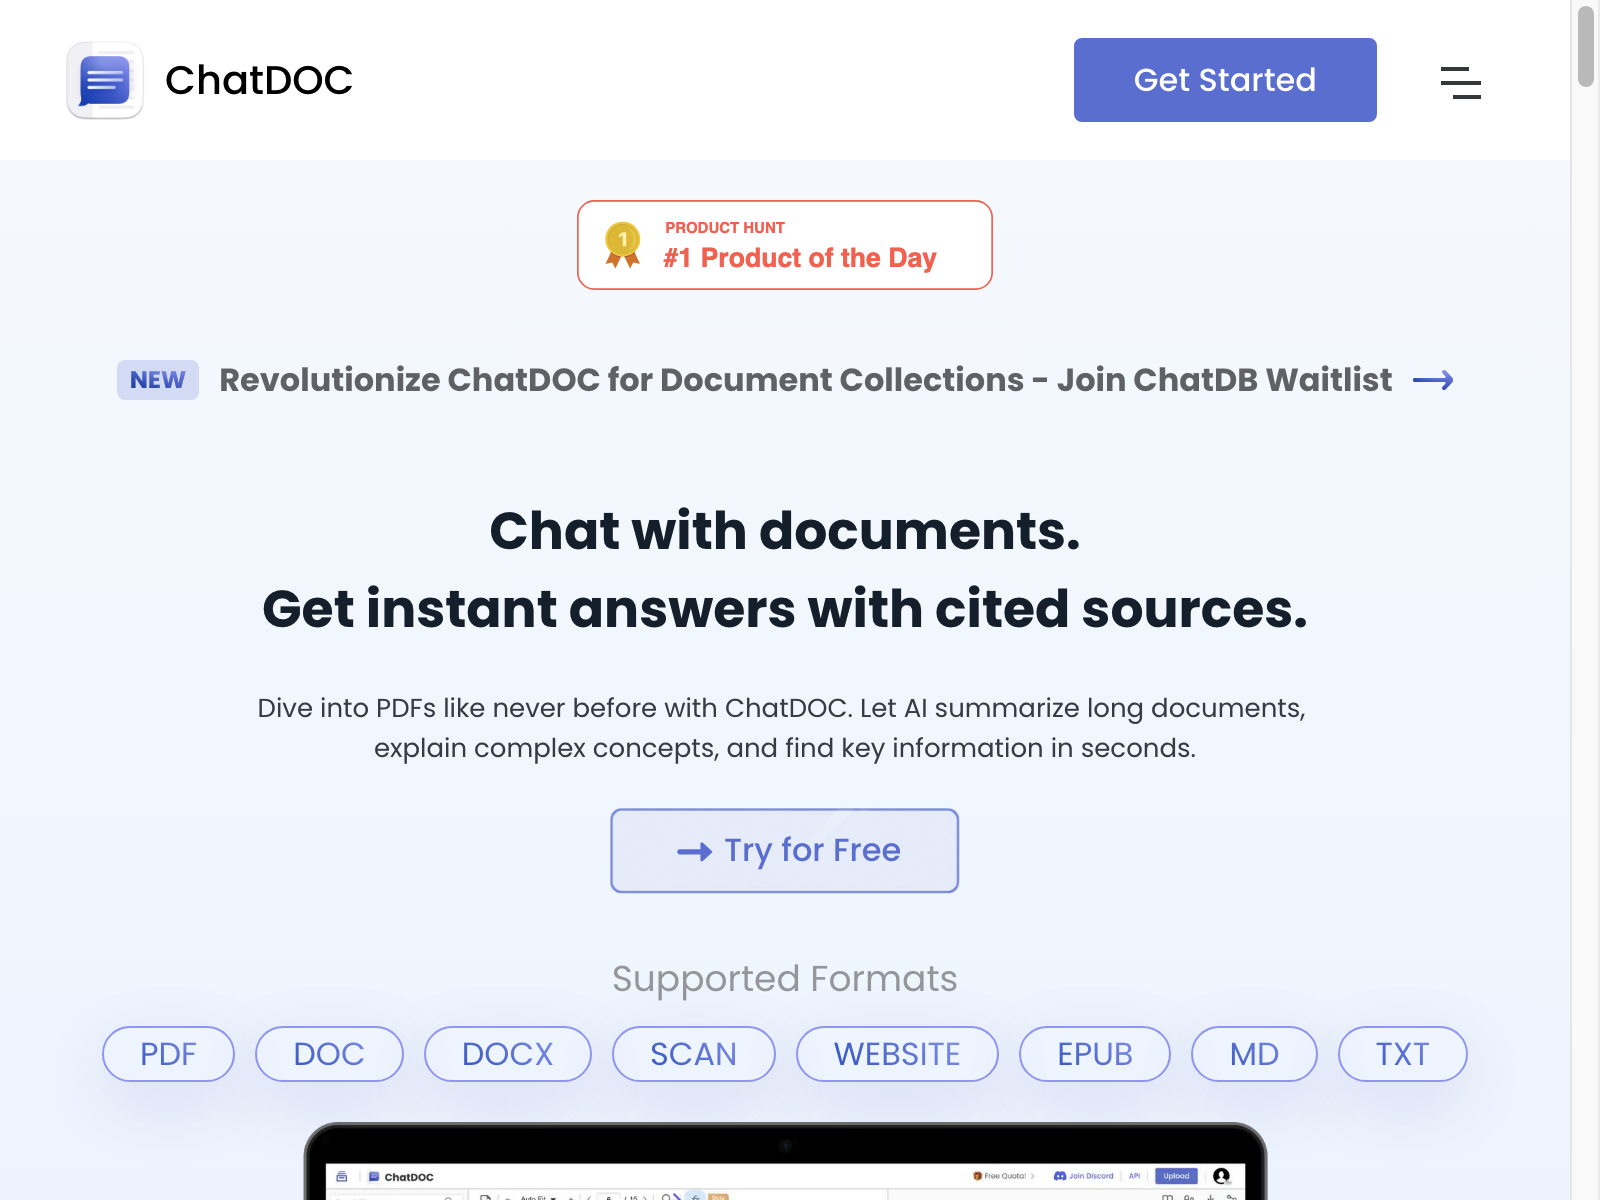 chatdoc Review: Pros, Cons, Alternatives